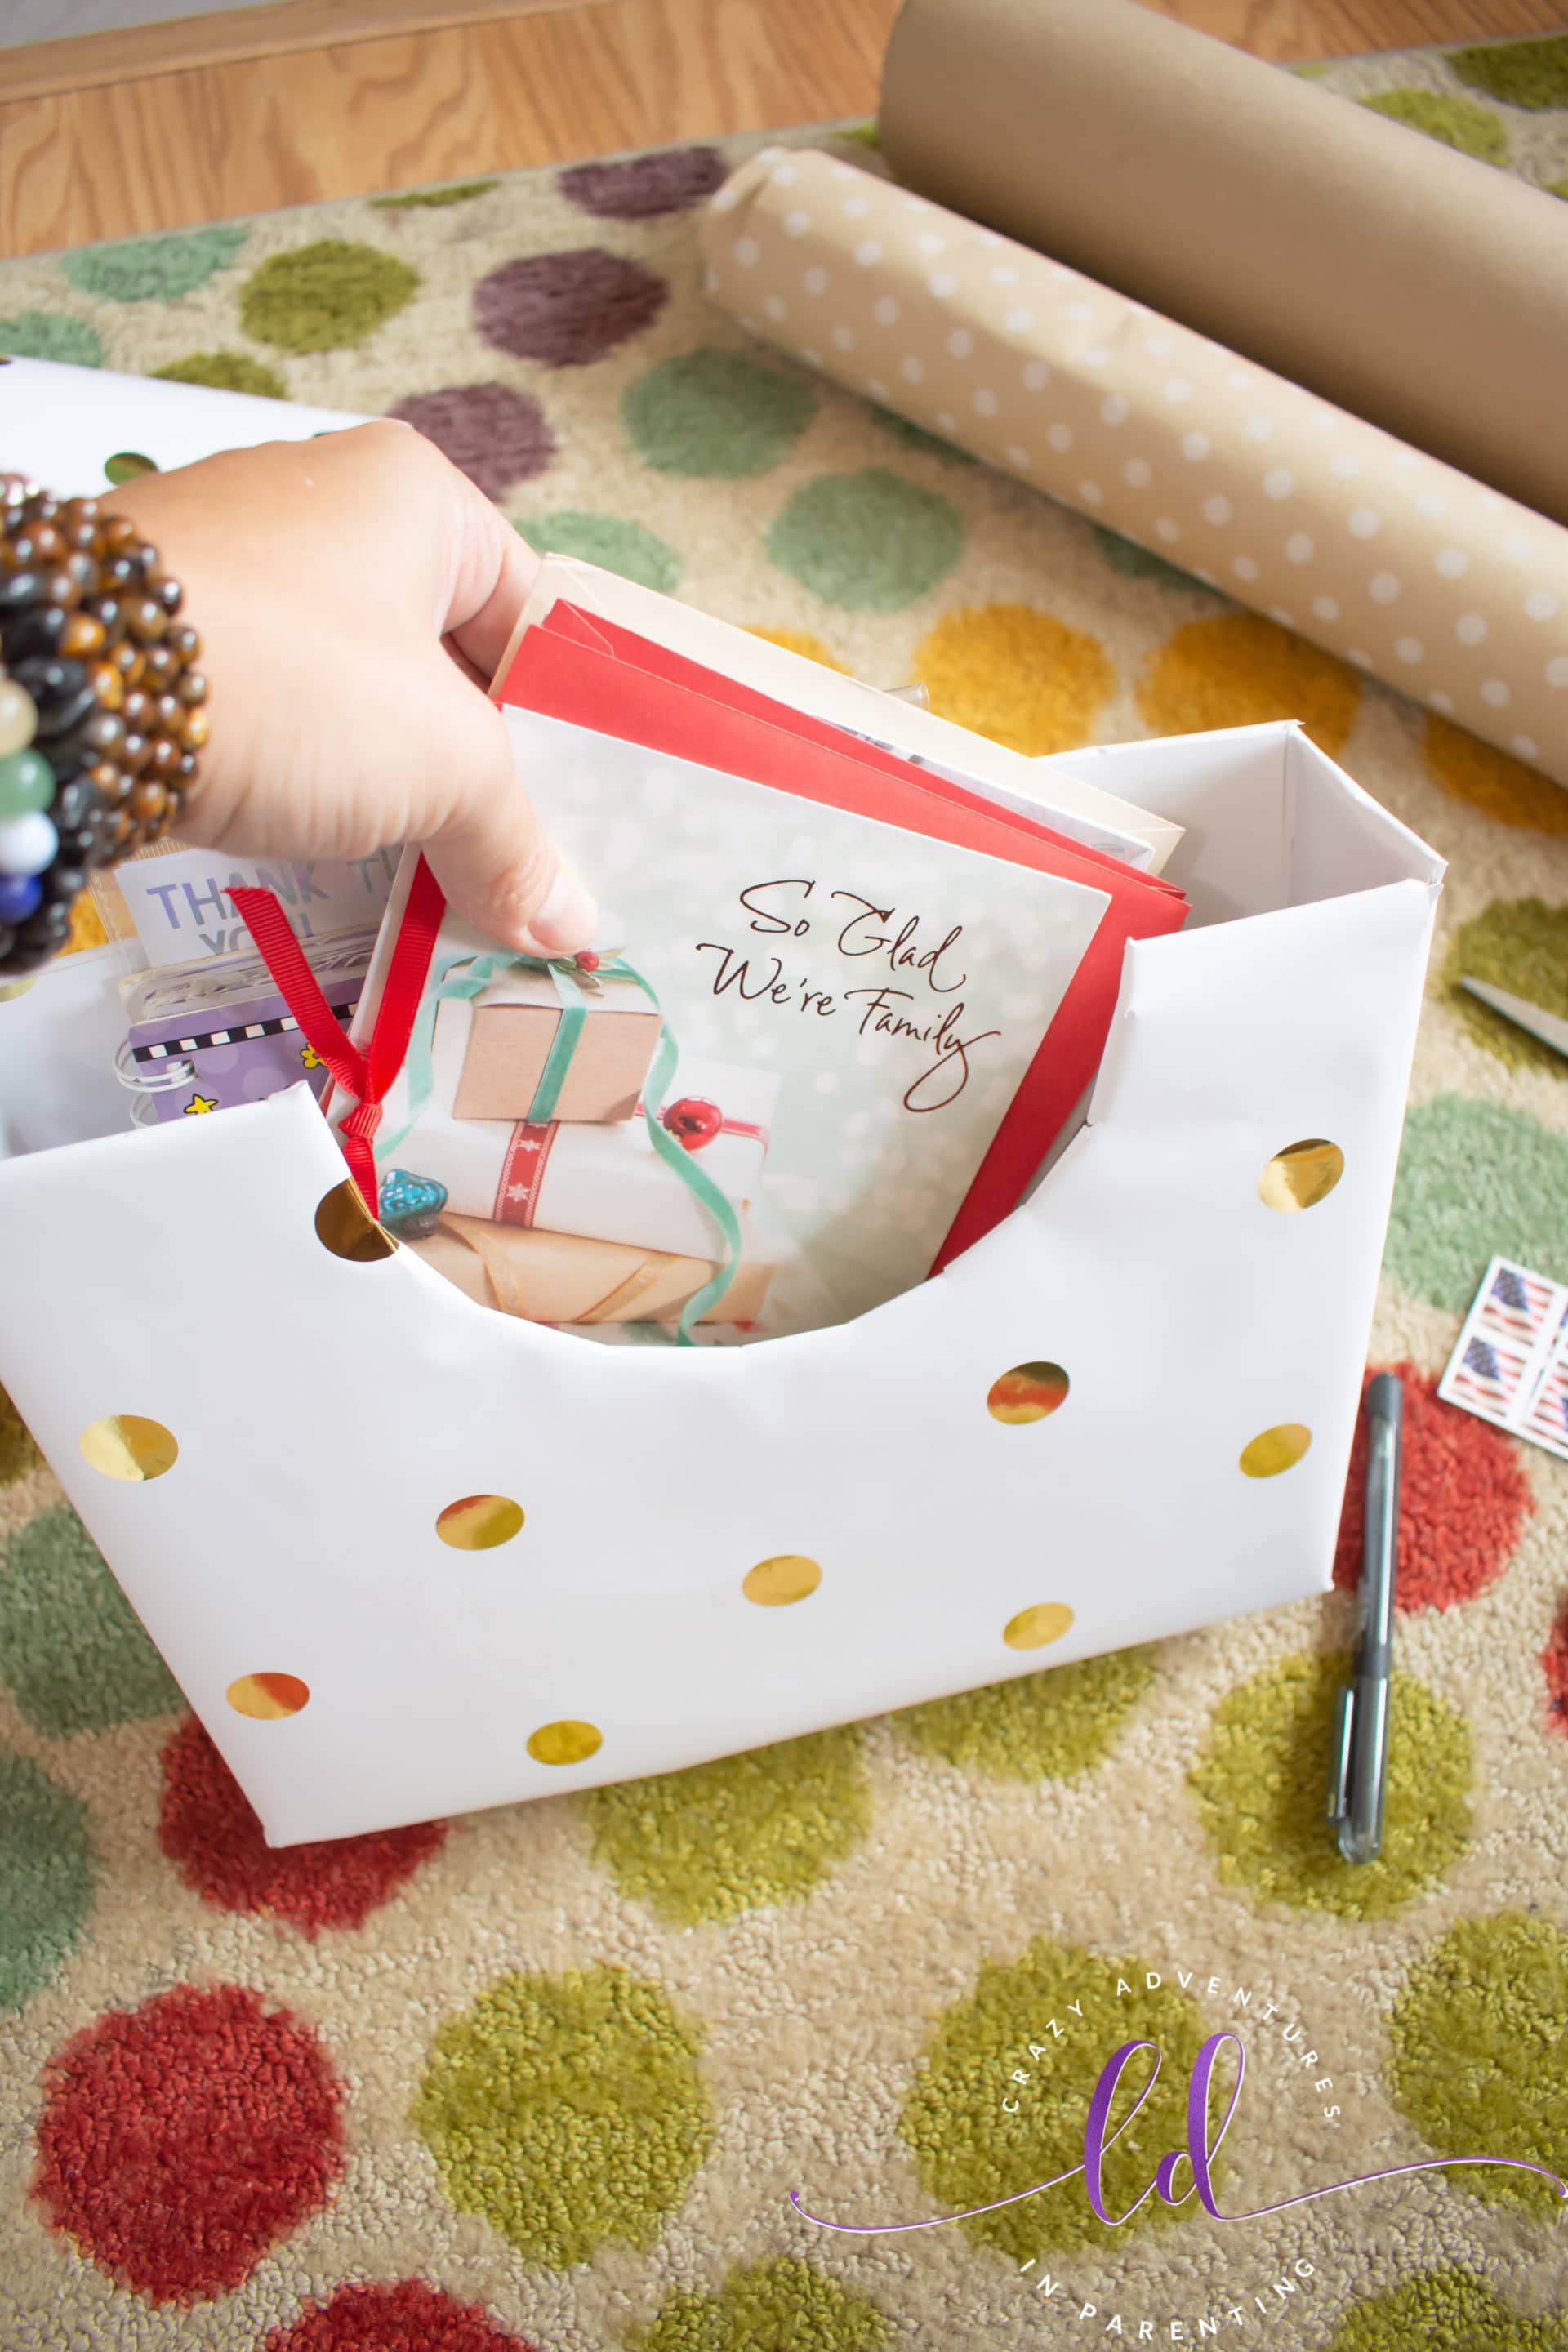 Ready to Use DIY Greeting Card Storage Box for American Greetings Cards